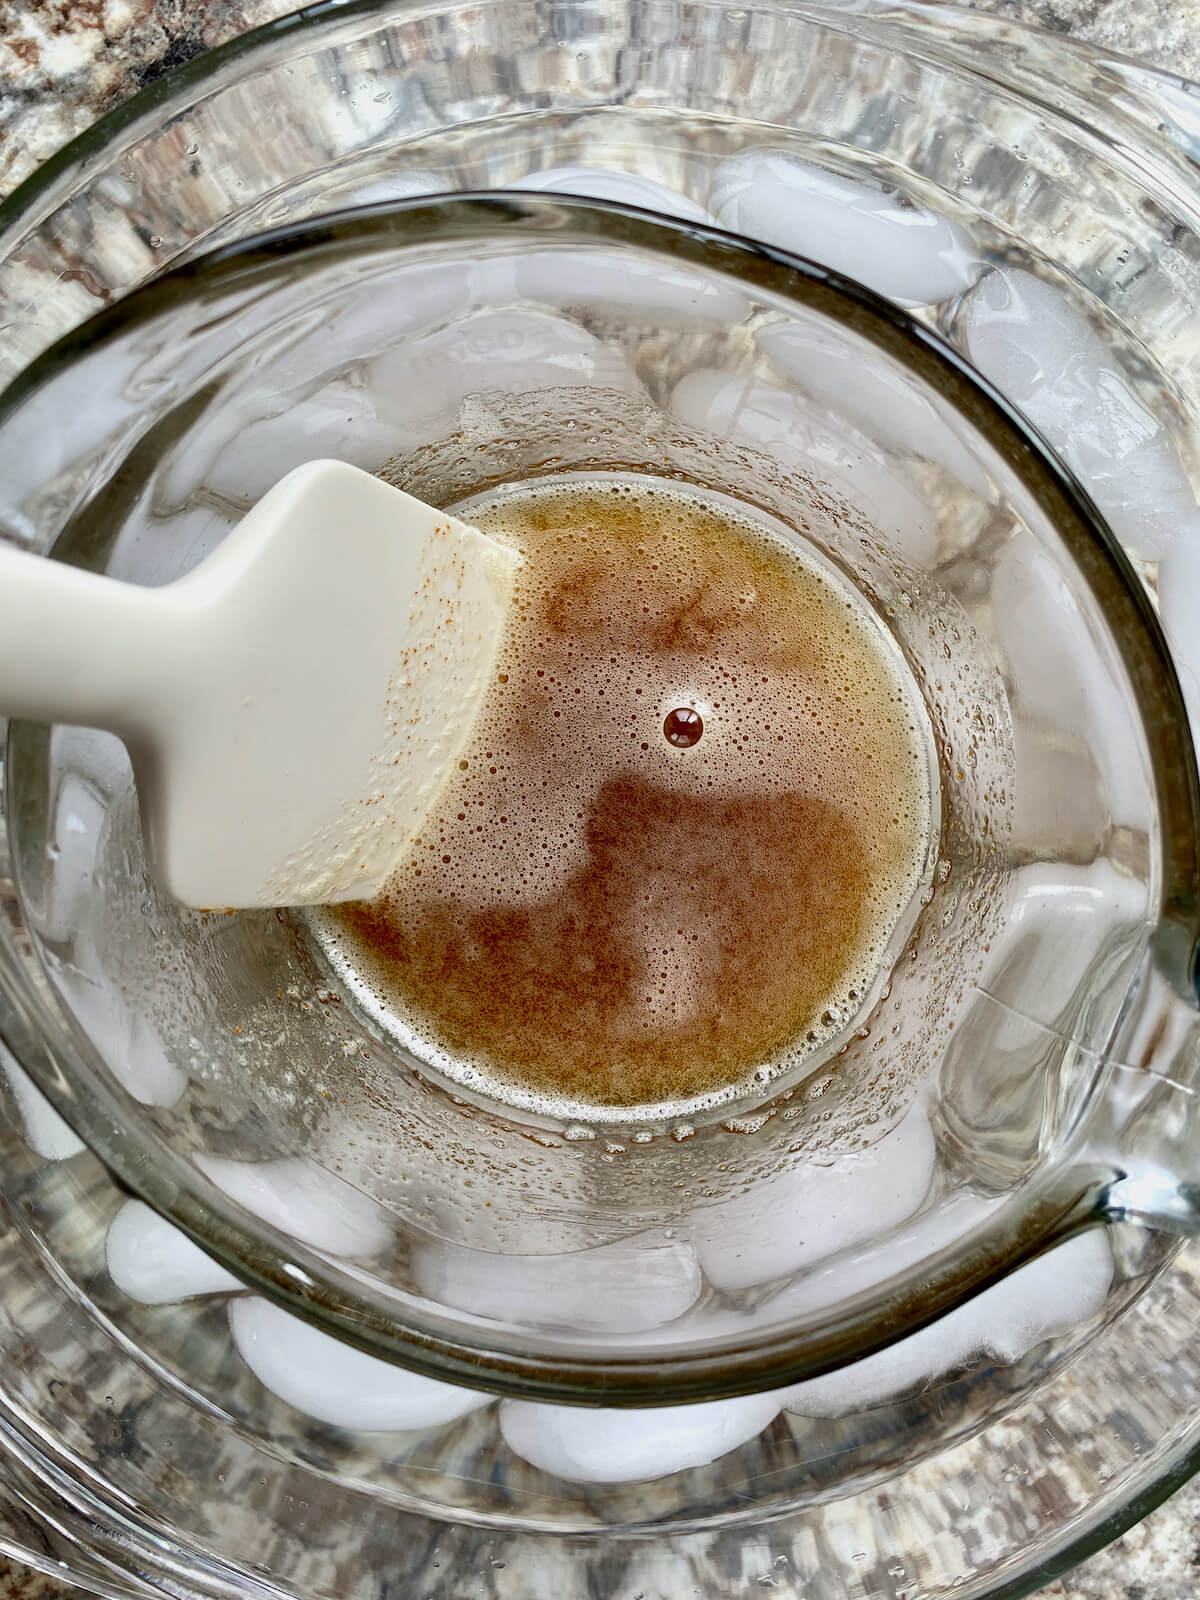 Brown butter in a glass measuring cup sitting inside a large bowl of ice water. There is a rubber spatula in the brown butter.